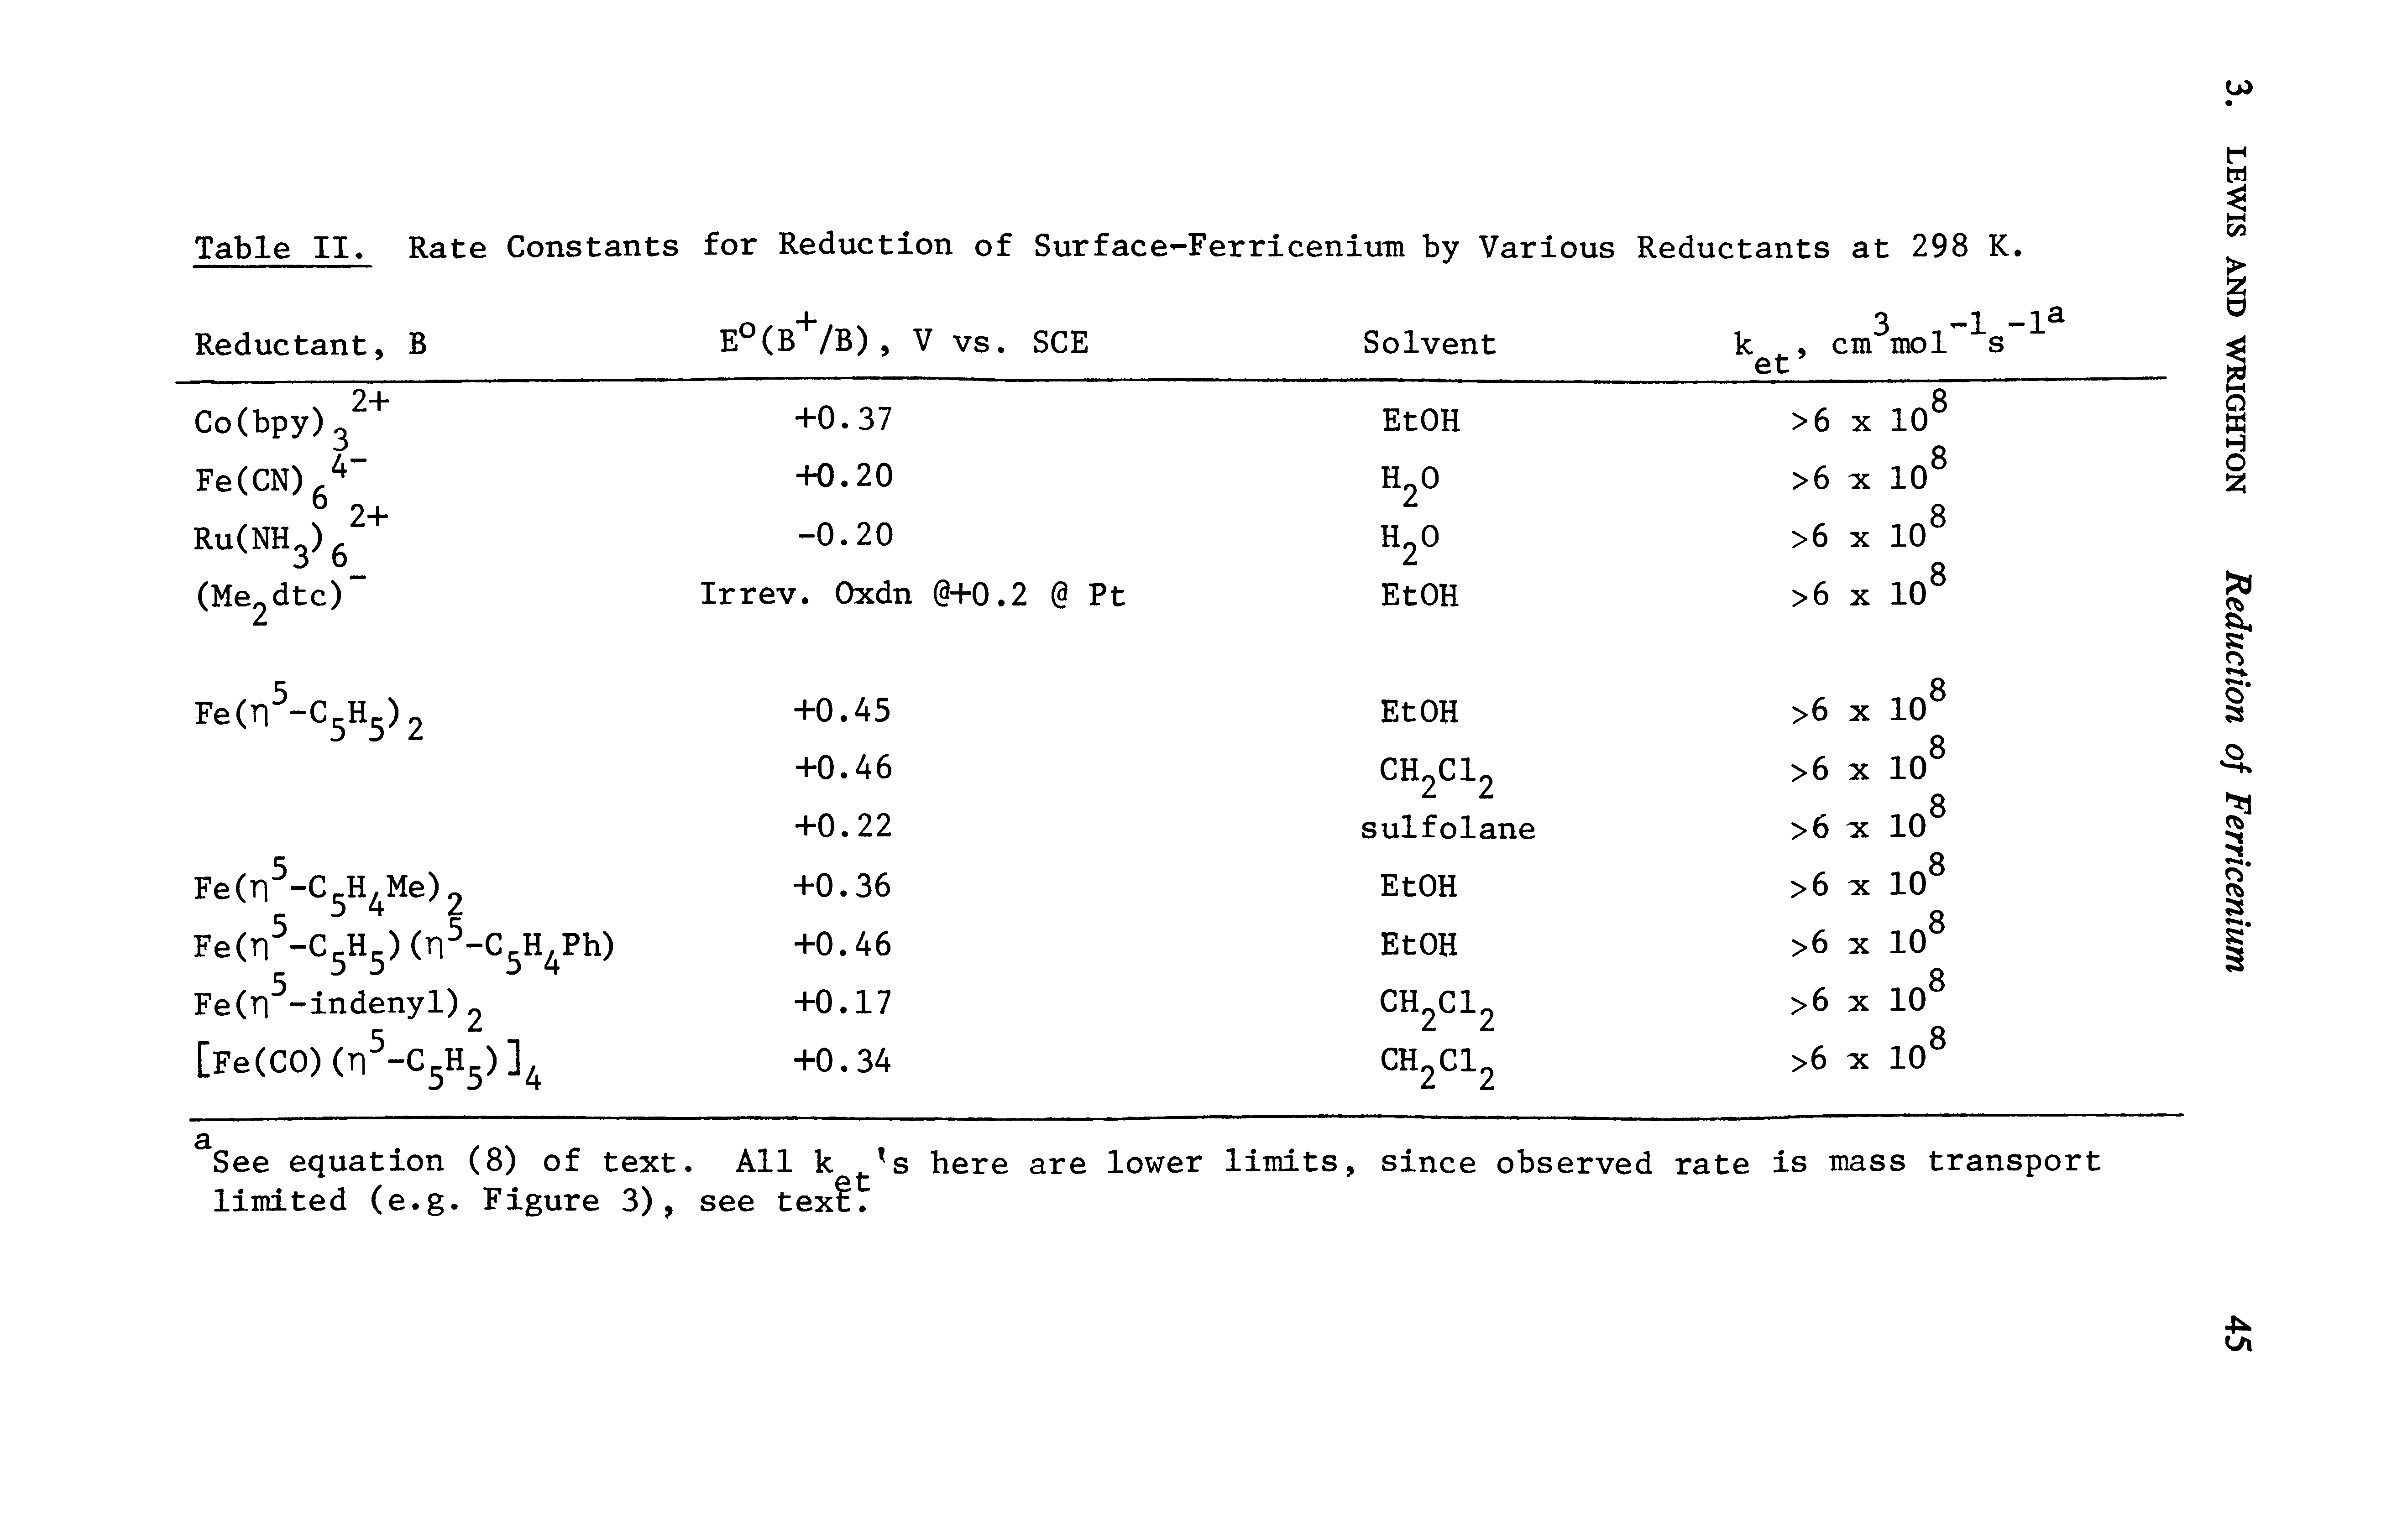 Table II, Rate Constants for Reduction of Surface-Ferricenium by Various Reductants at 298 K.